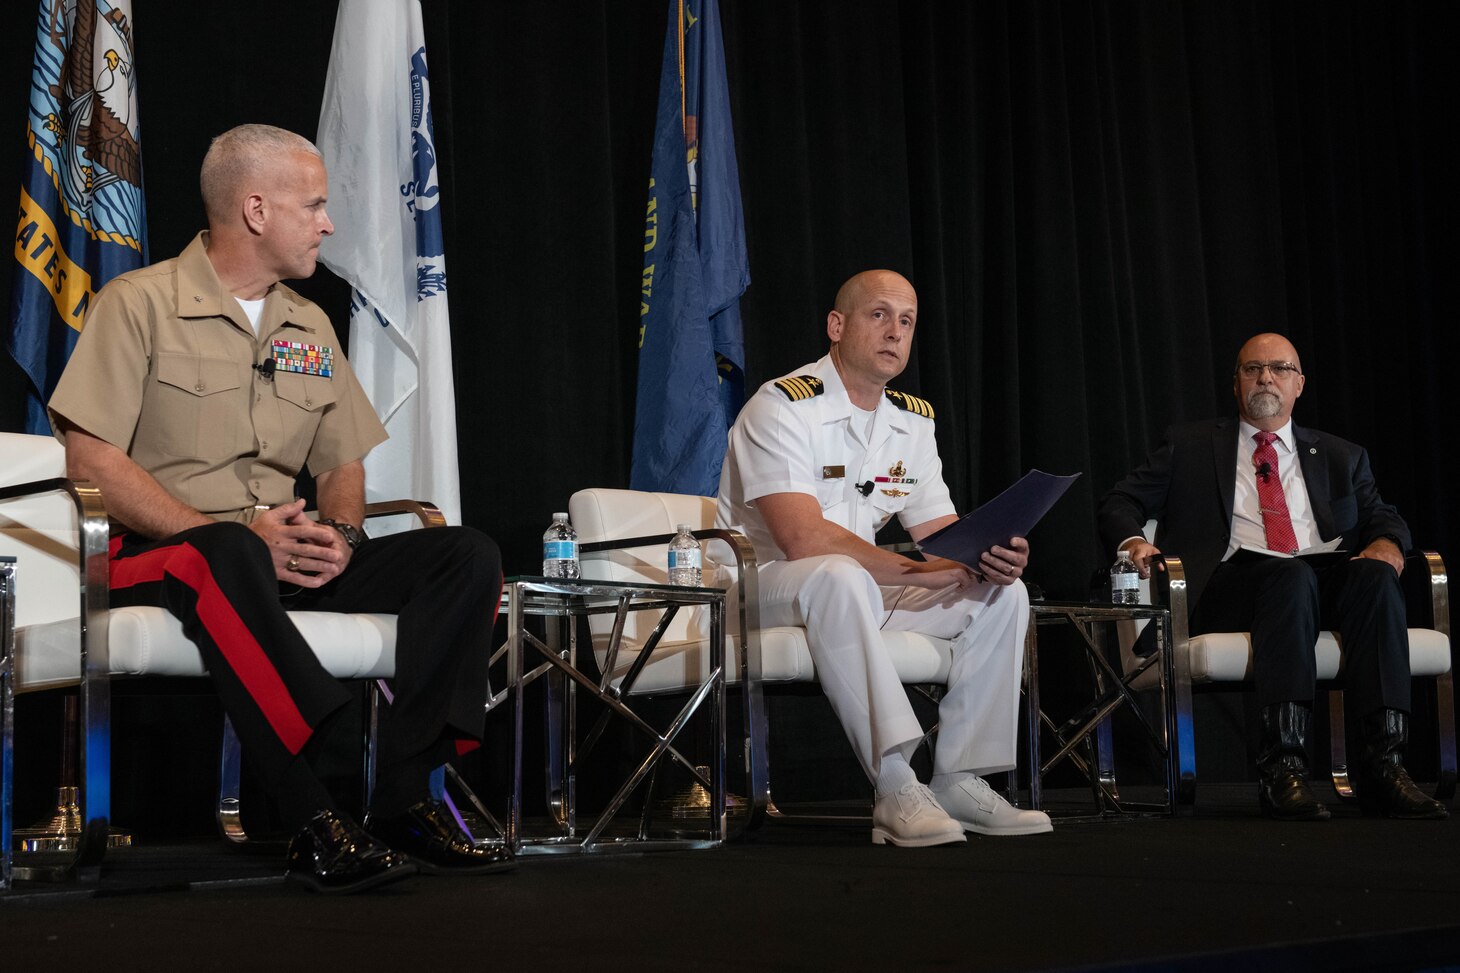 Navy Capt. Jeff Morganthaler, MOC Director, Navy Expeditionary Combat Command, discusses adapting technology and processes to provide necessary capabilities for great power competition during the "Future of Naval Expeditionary Warfare in All-Domain Operations" panel at the Sea-Air-Space 2021 Exposition.